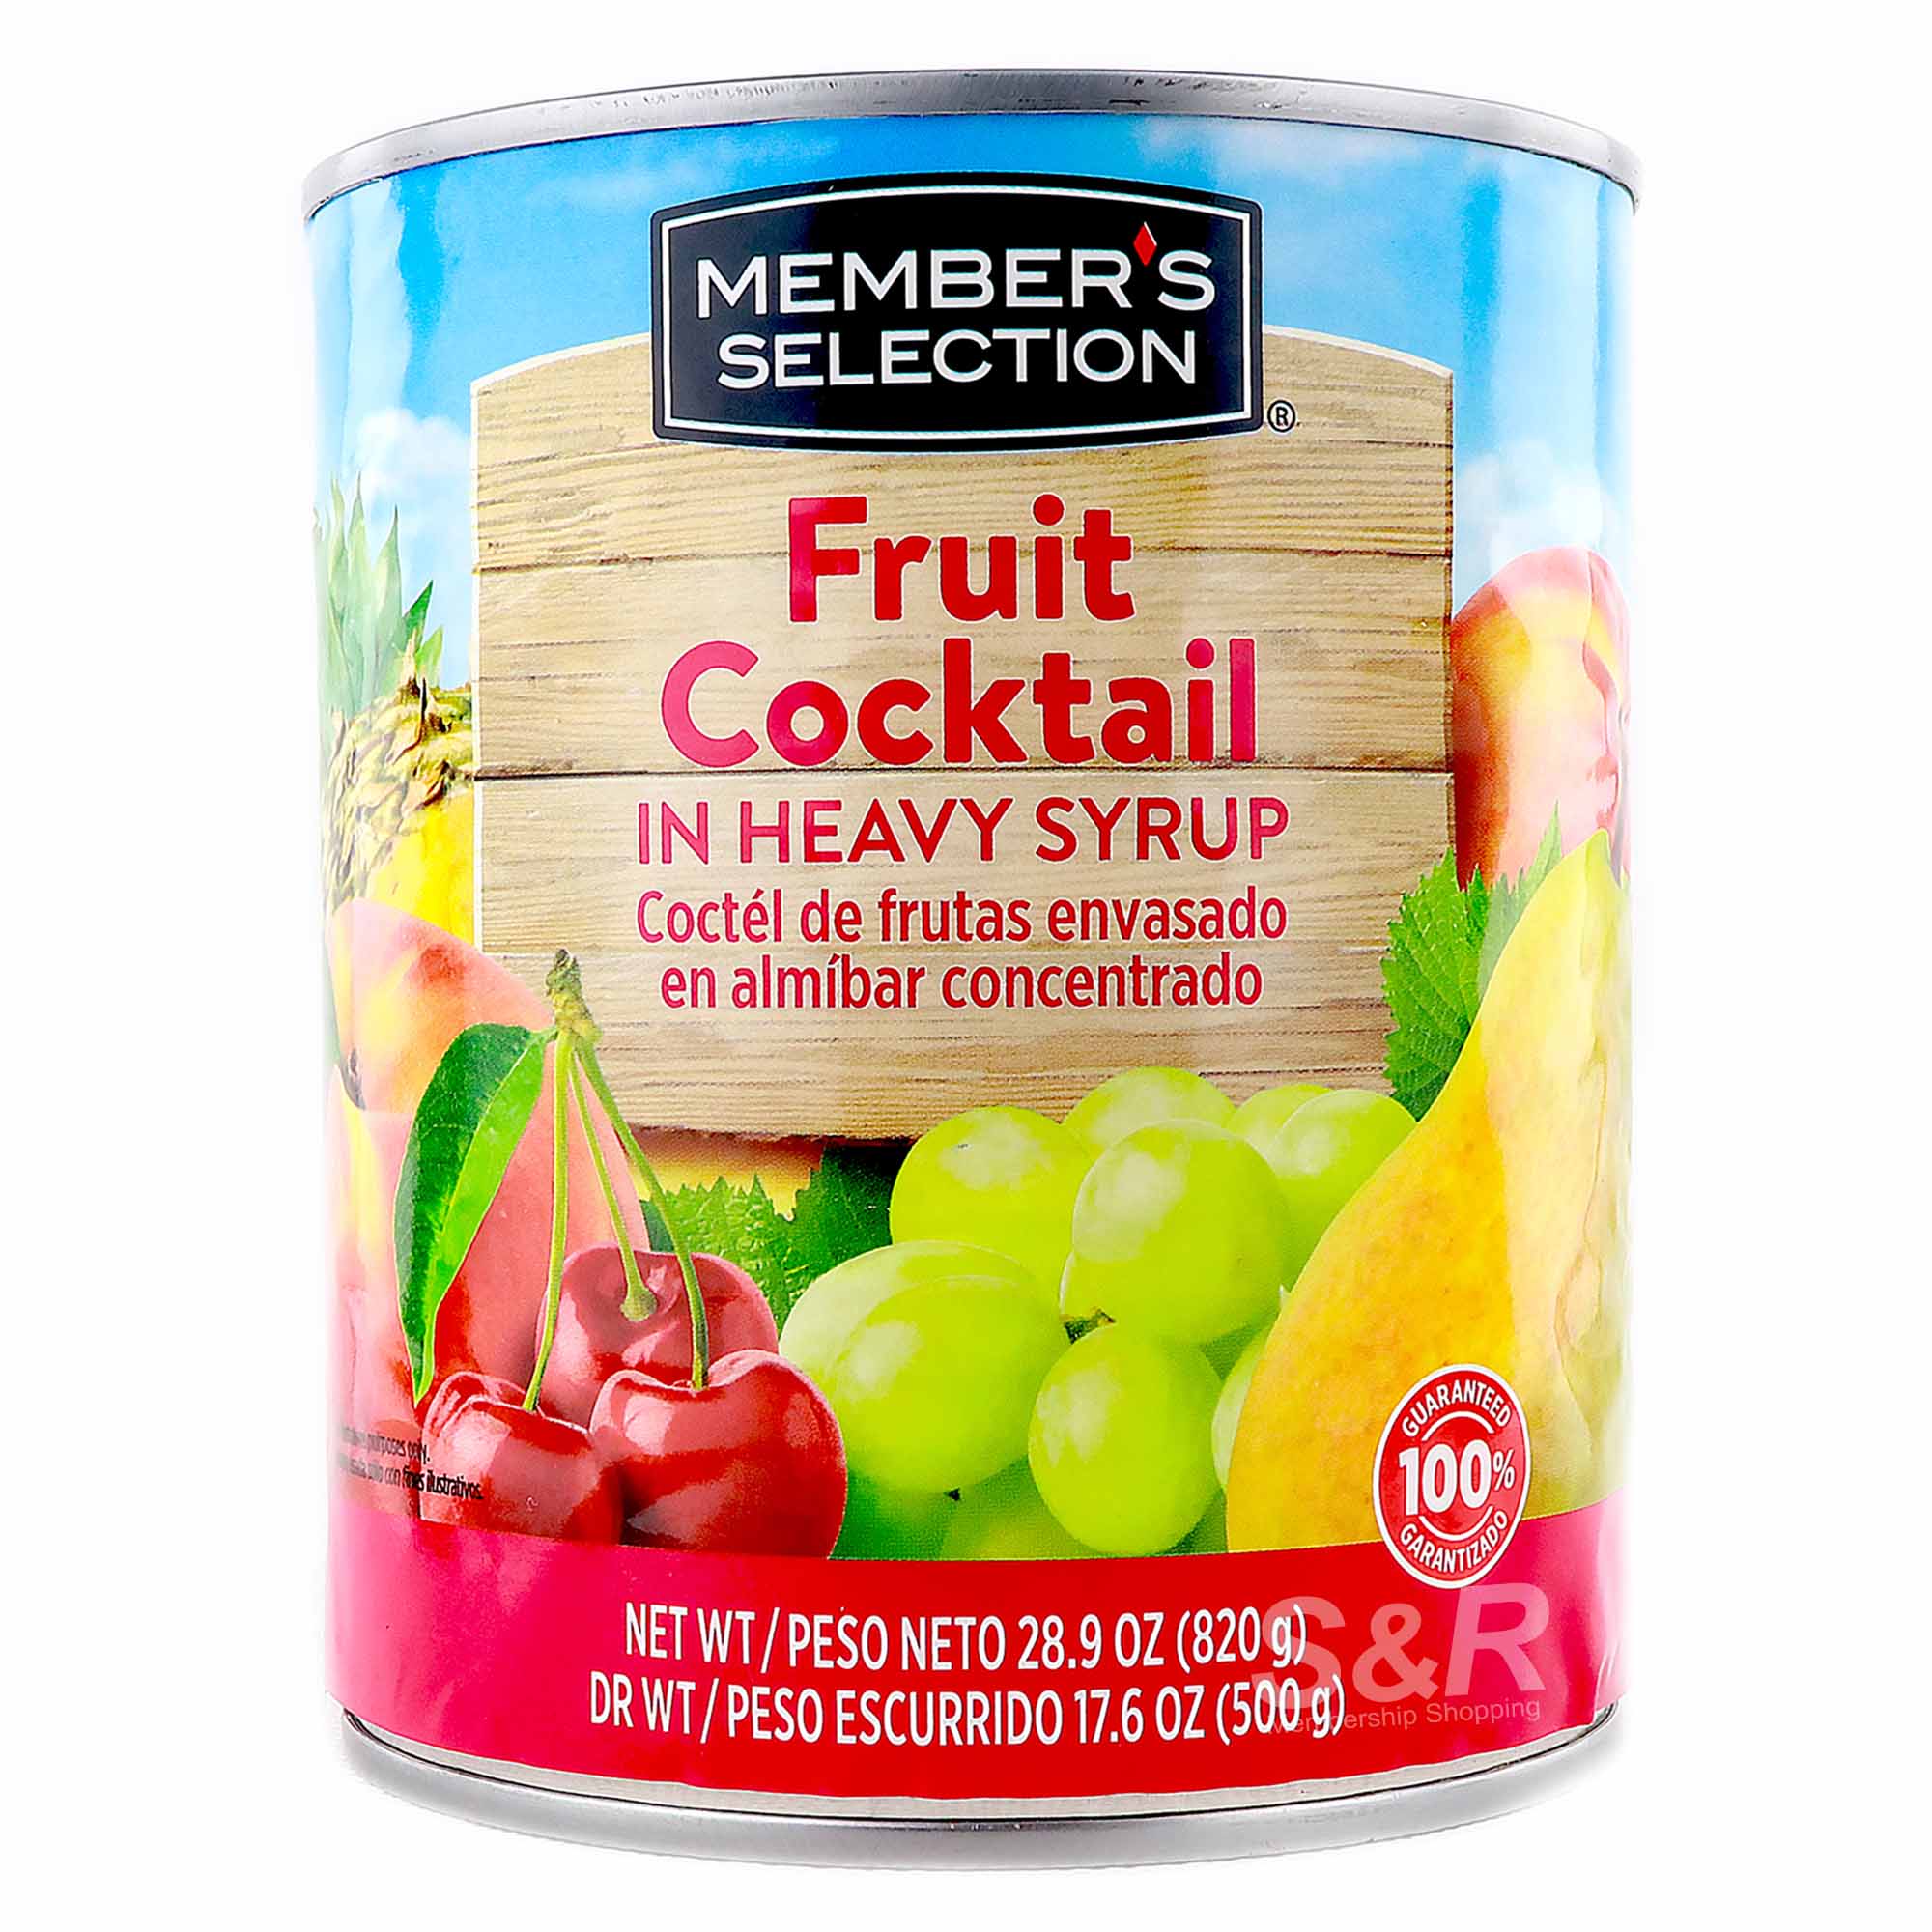 Member's Selection Fruit Cocktail in Heavy Syrup 820g